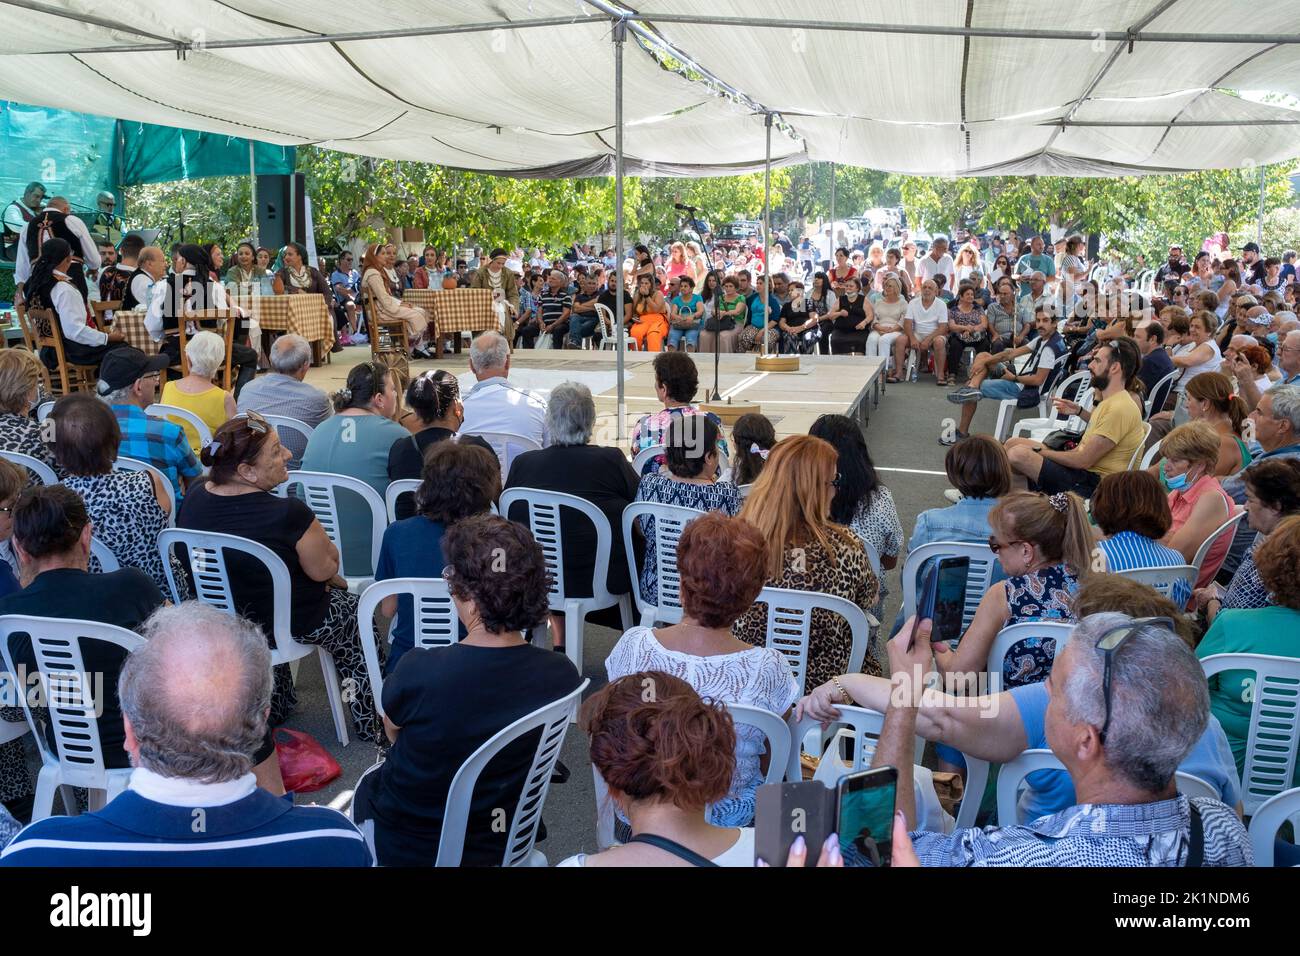 Crowds listen to traditional music at the Statos-Ayios Fotios Rural Festival, Paphos Region, Cyprus. Stock Photo